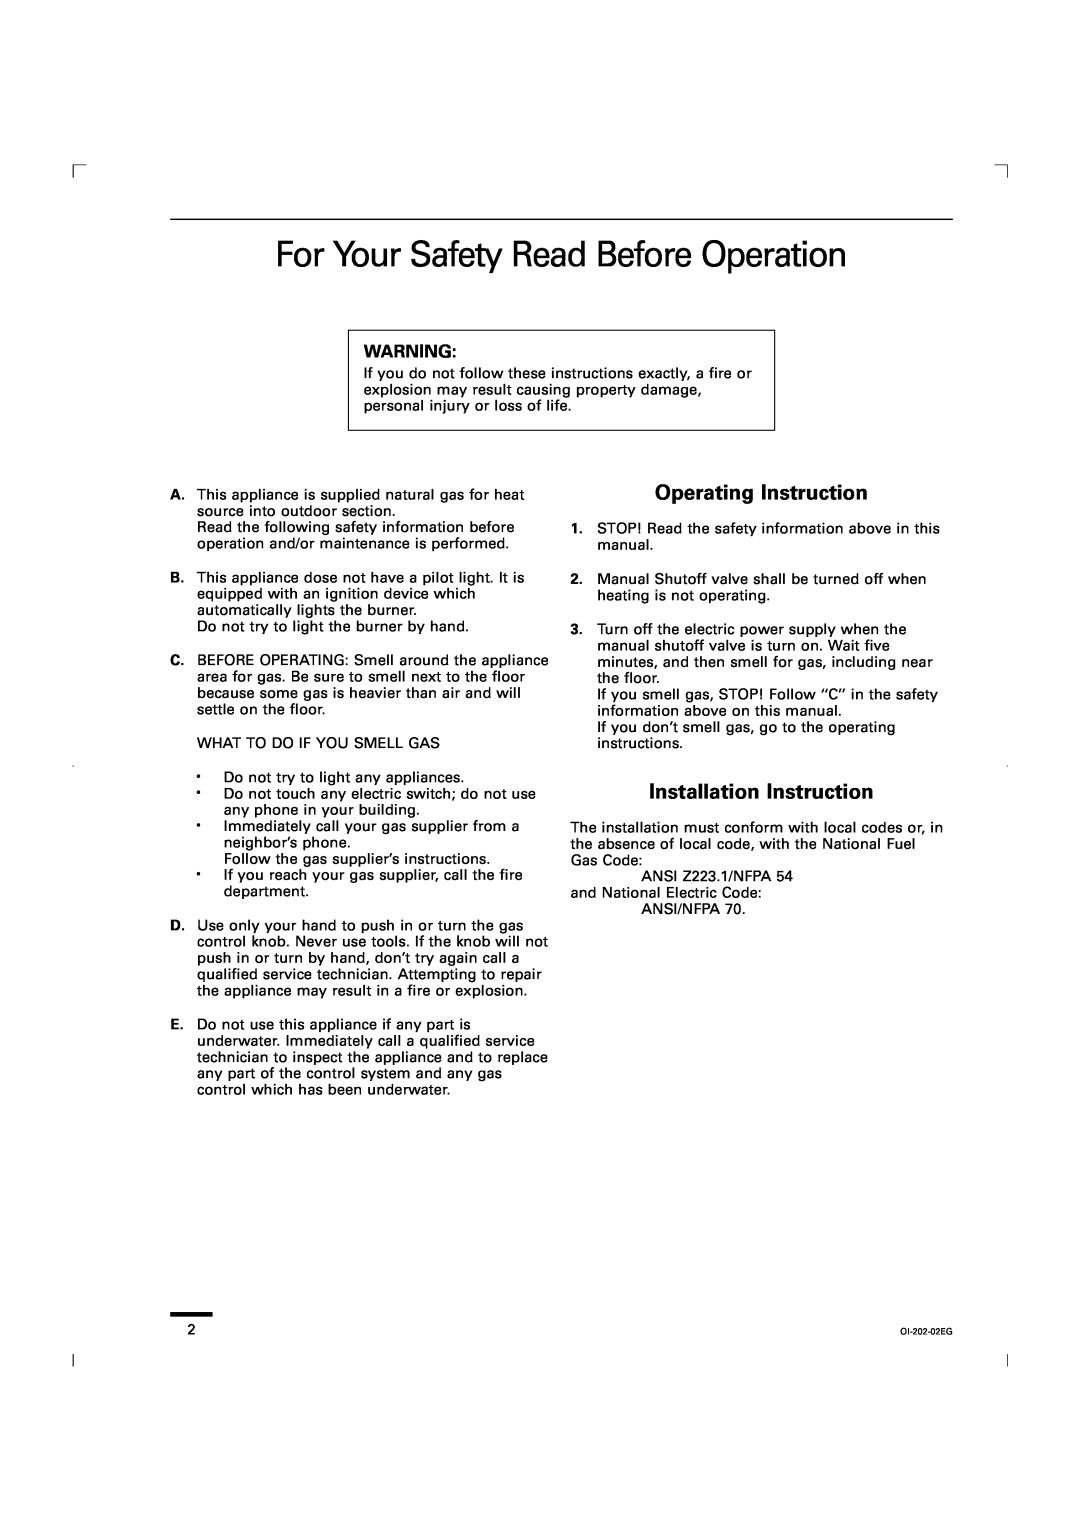 Sanyo CG1411, KGS1411 service manual For Your Safety Read Before Operation, Operating Instruction, Installation Instruction 